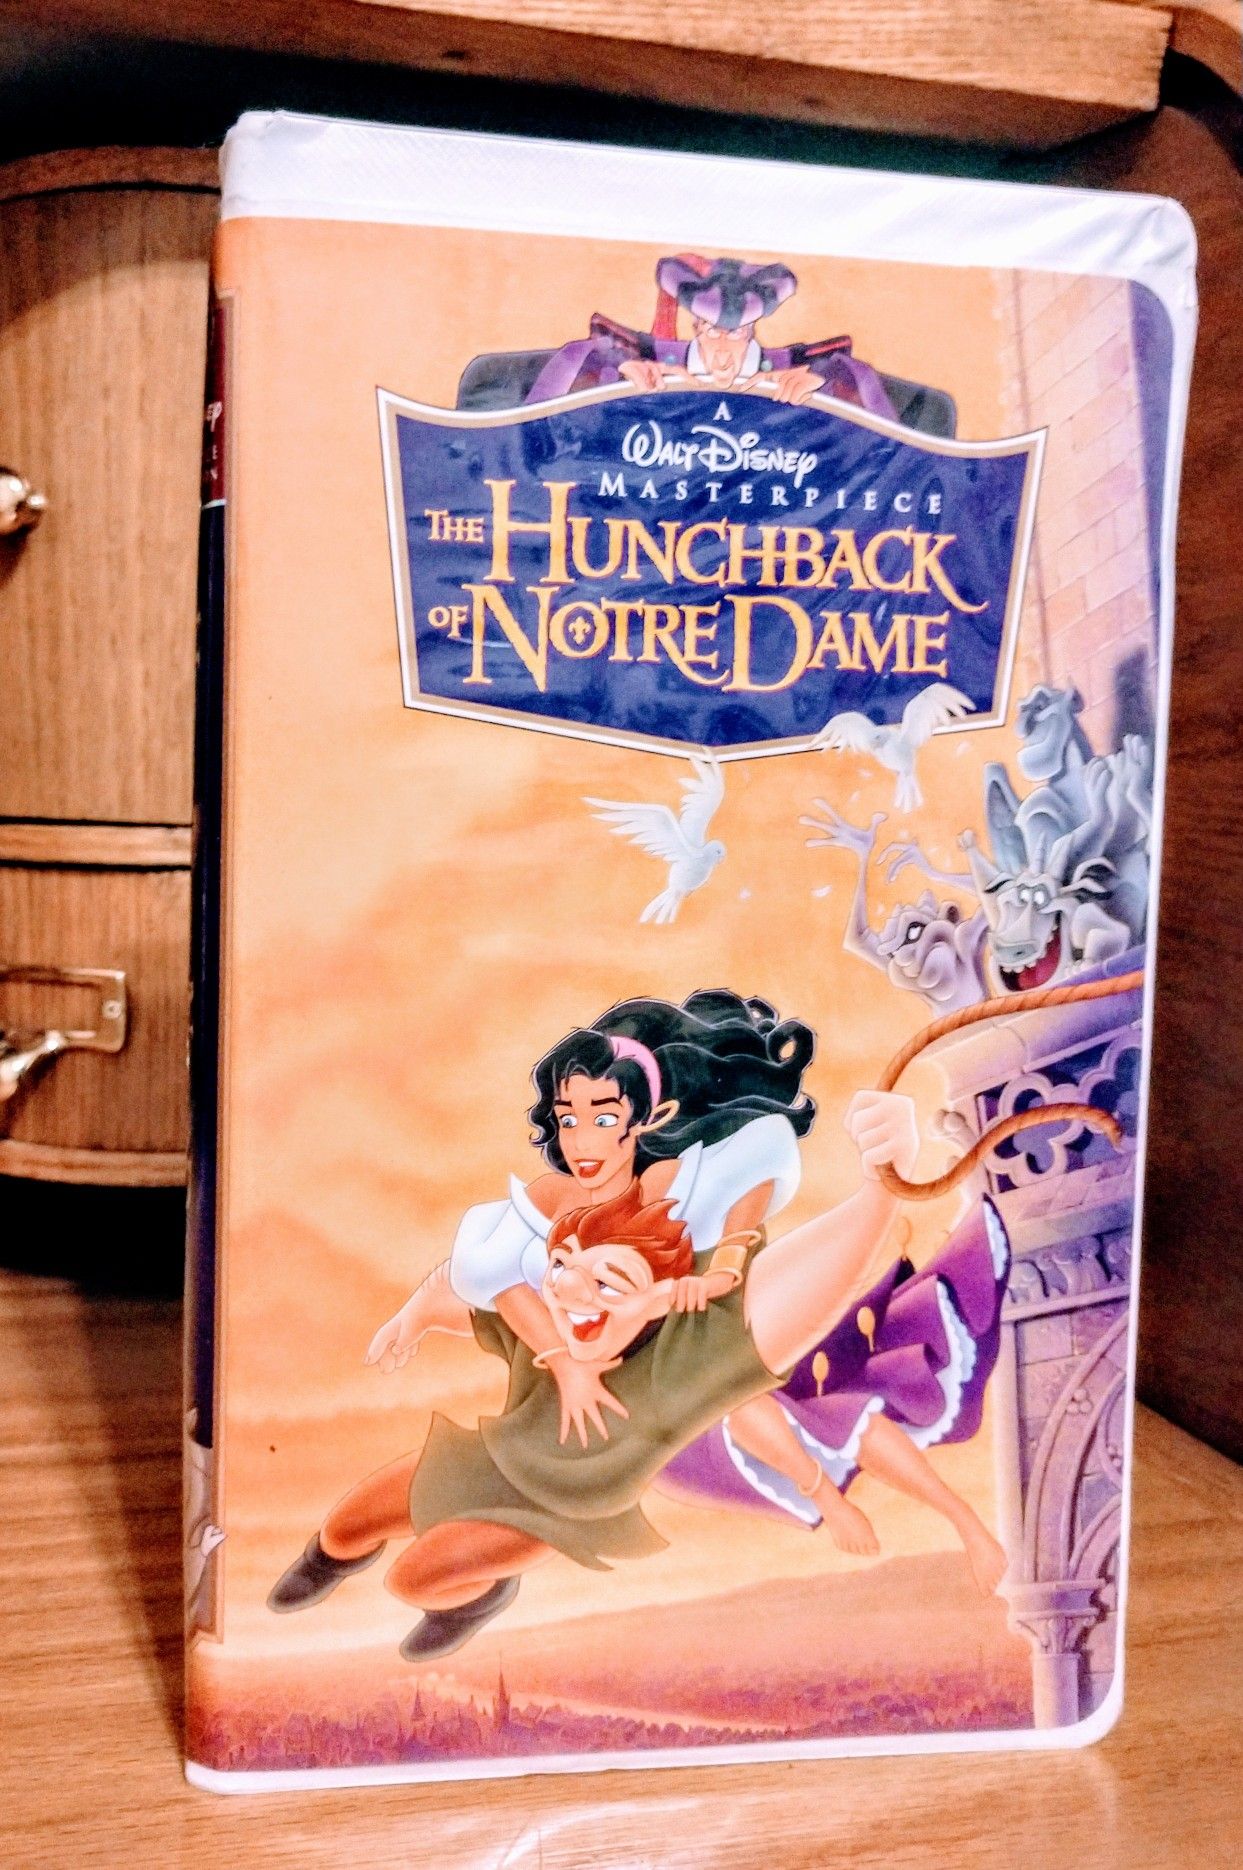 Disney's Hunchback Of Notre Dame Masterpiece Collection VHS VCR Movie